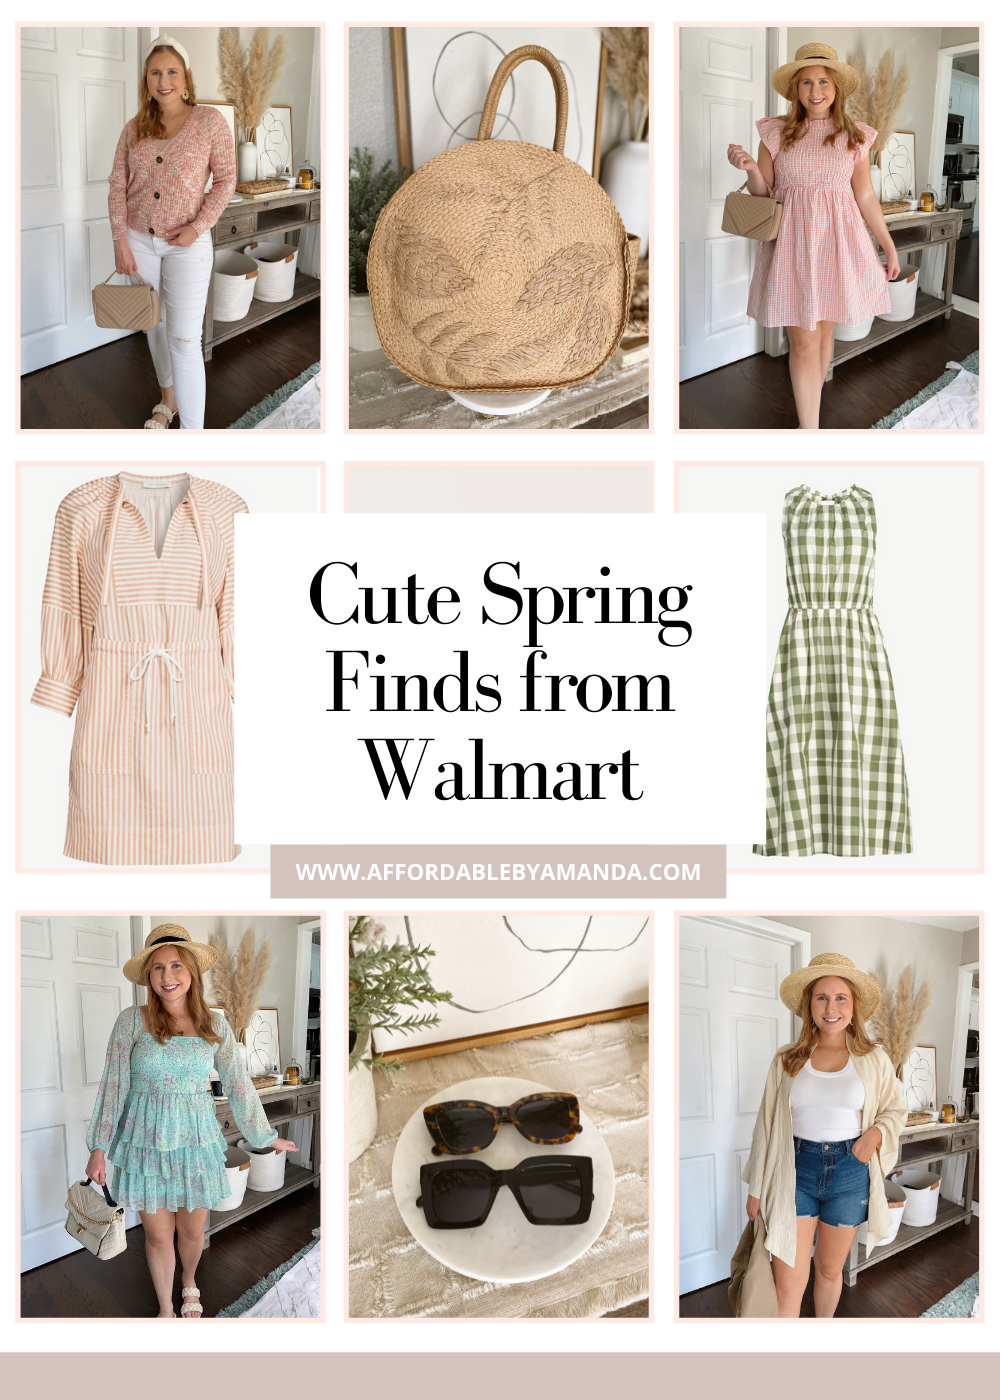 Cute Spring Finds from Walmart - Affordable by Amanda